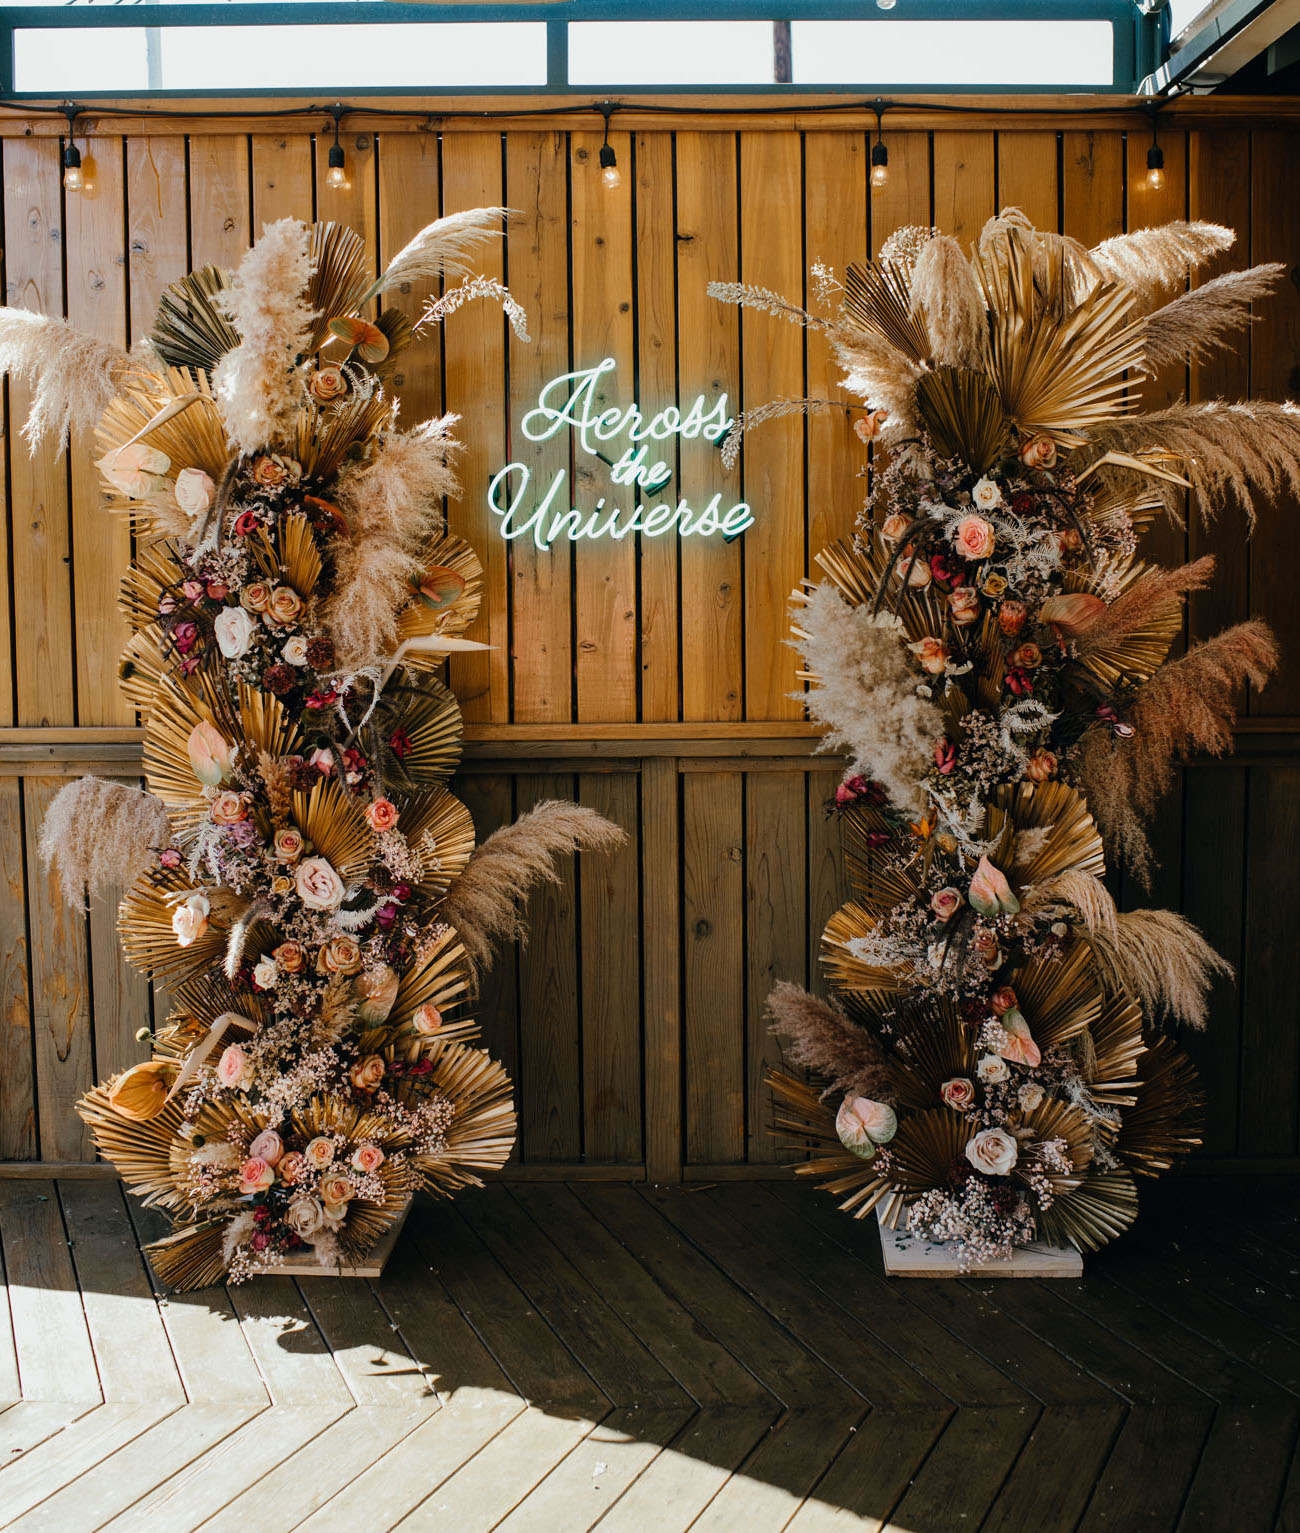 "Across the universe" gorgeous wedding ceremony backdrop sign, the perfect modern accent to a pampas grass altar. // Fun and bright neon wedding sign decor ideas // mysweetengagement.com